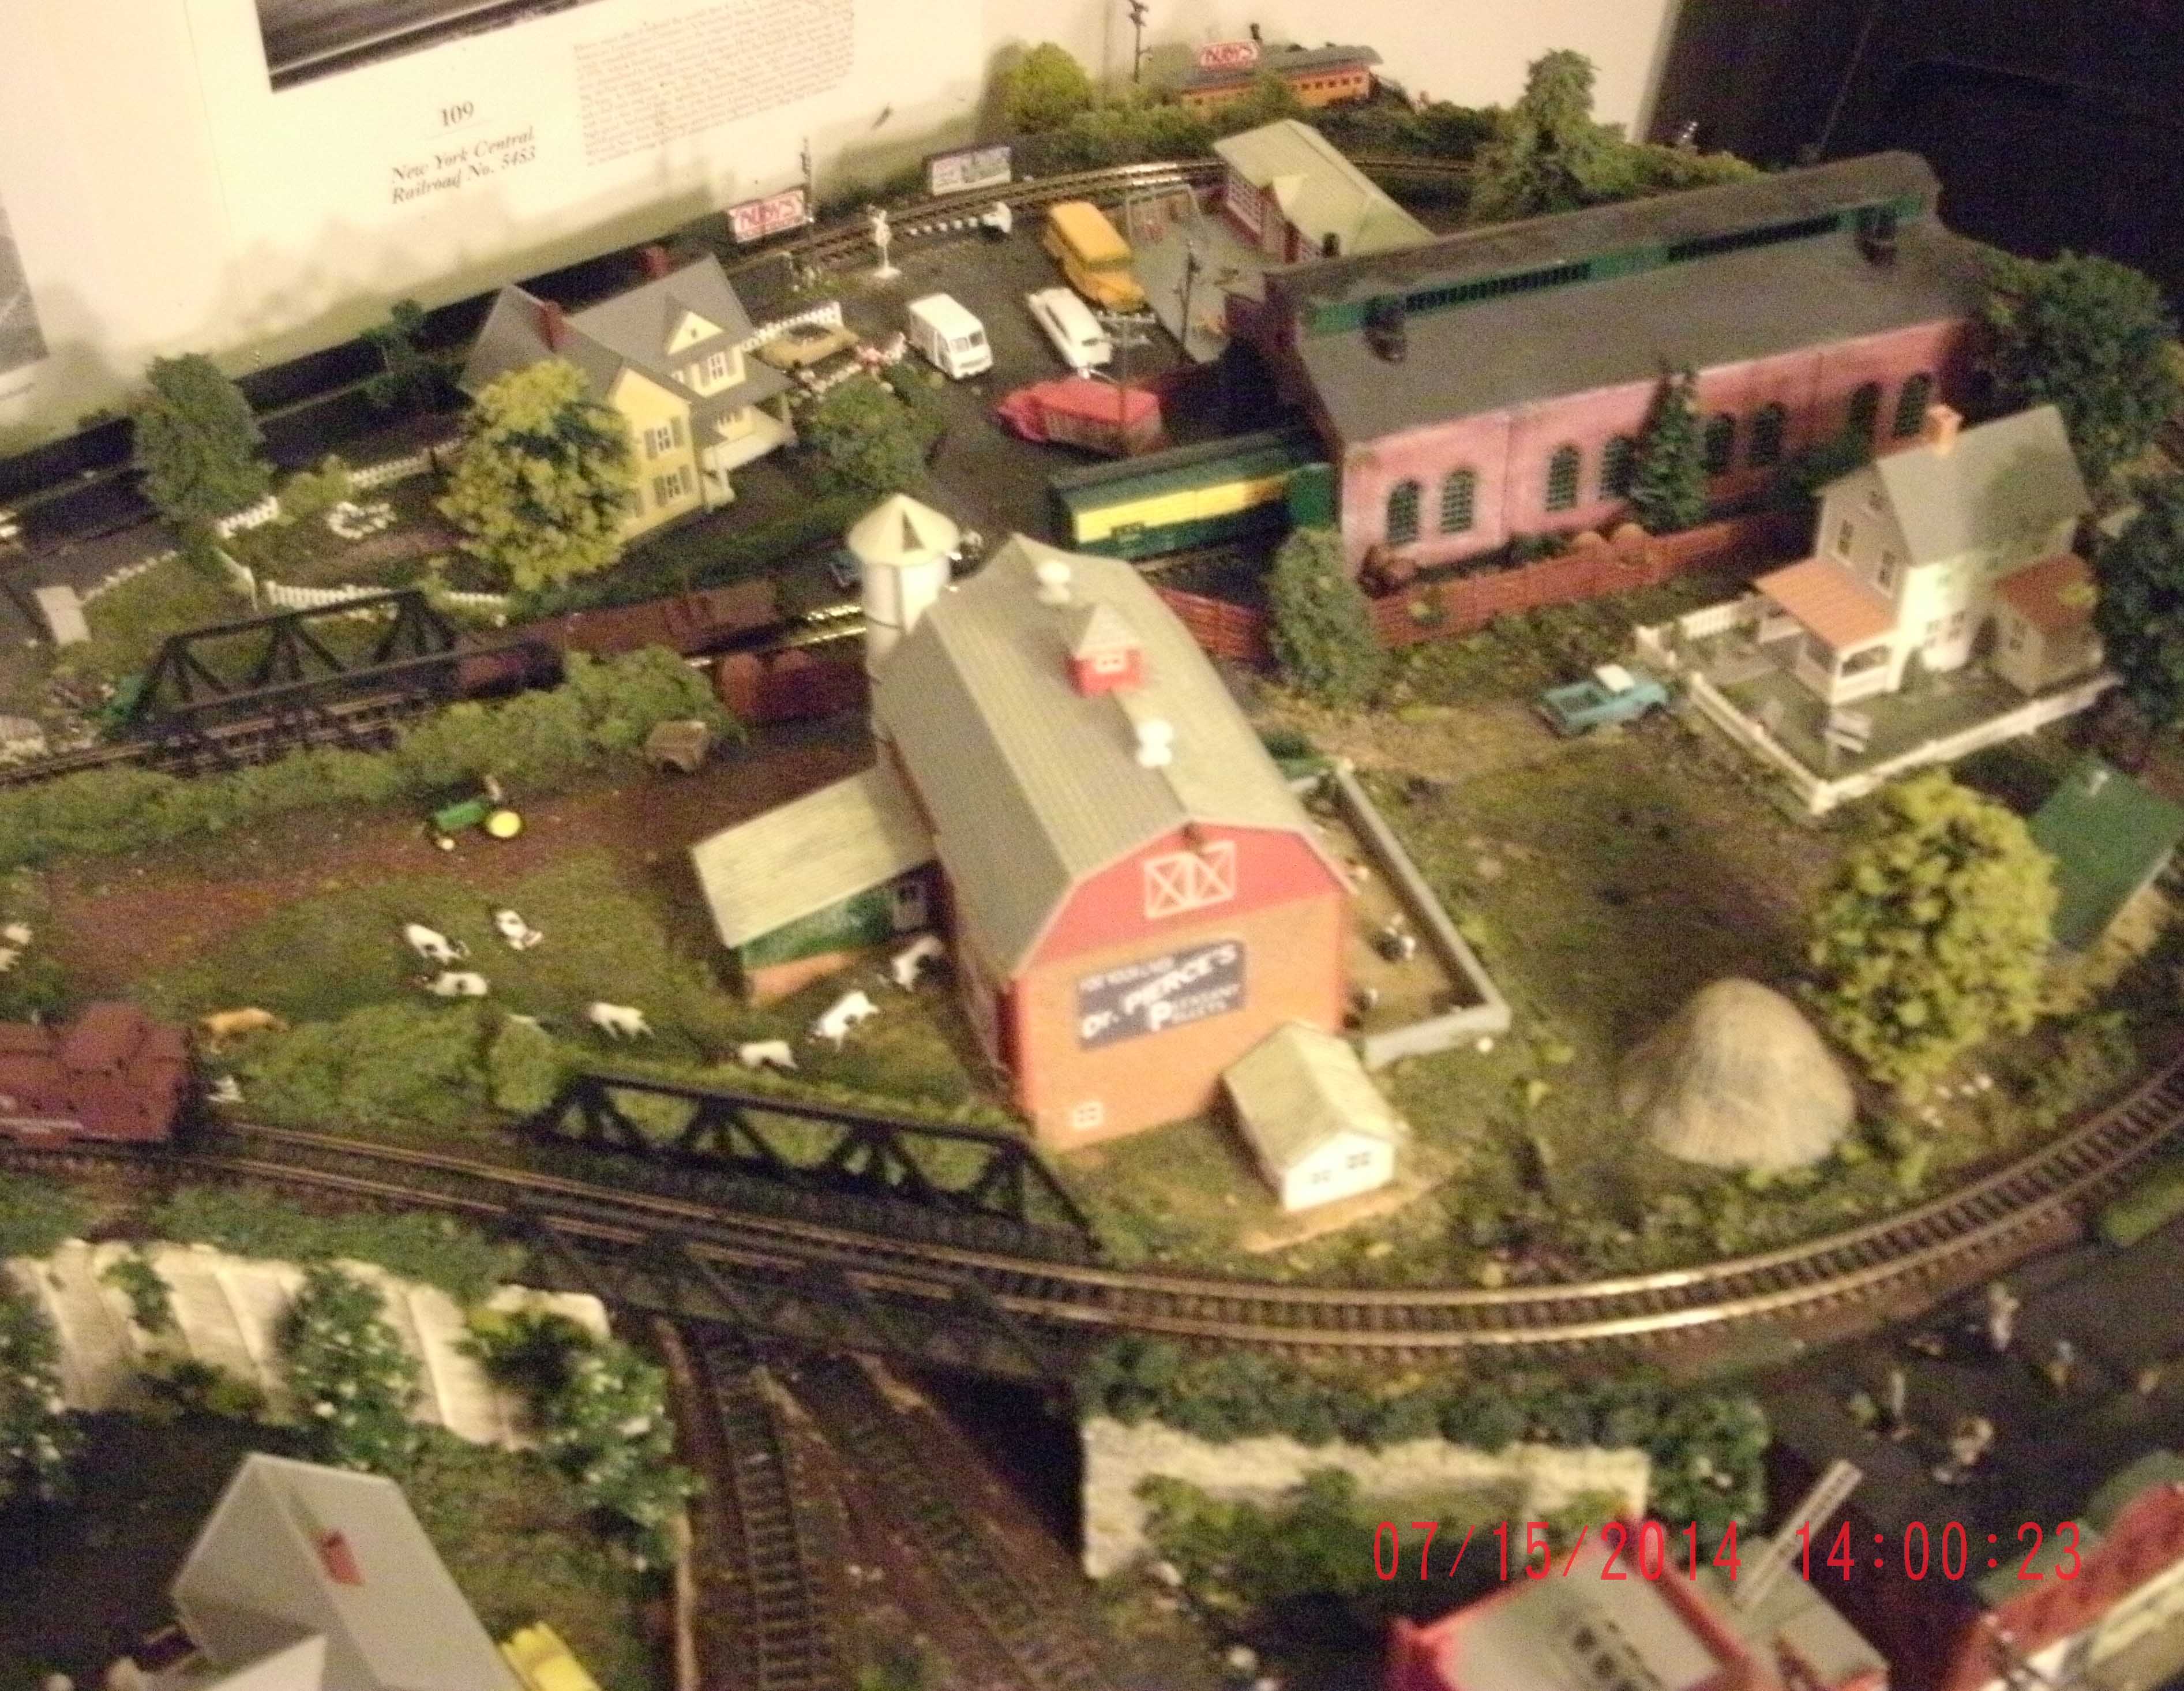 Lot of impressive accessories are used in this great model train 